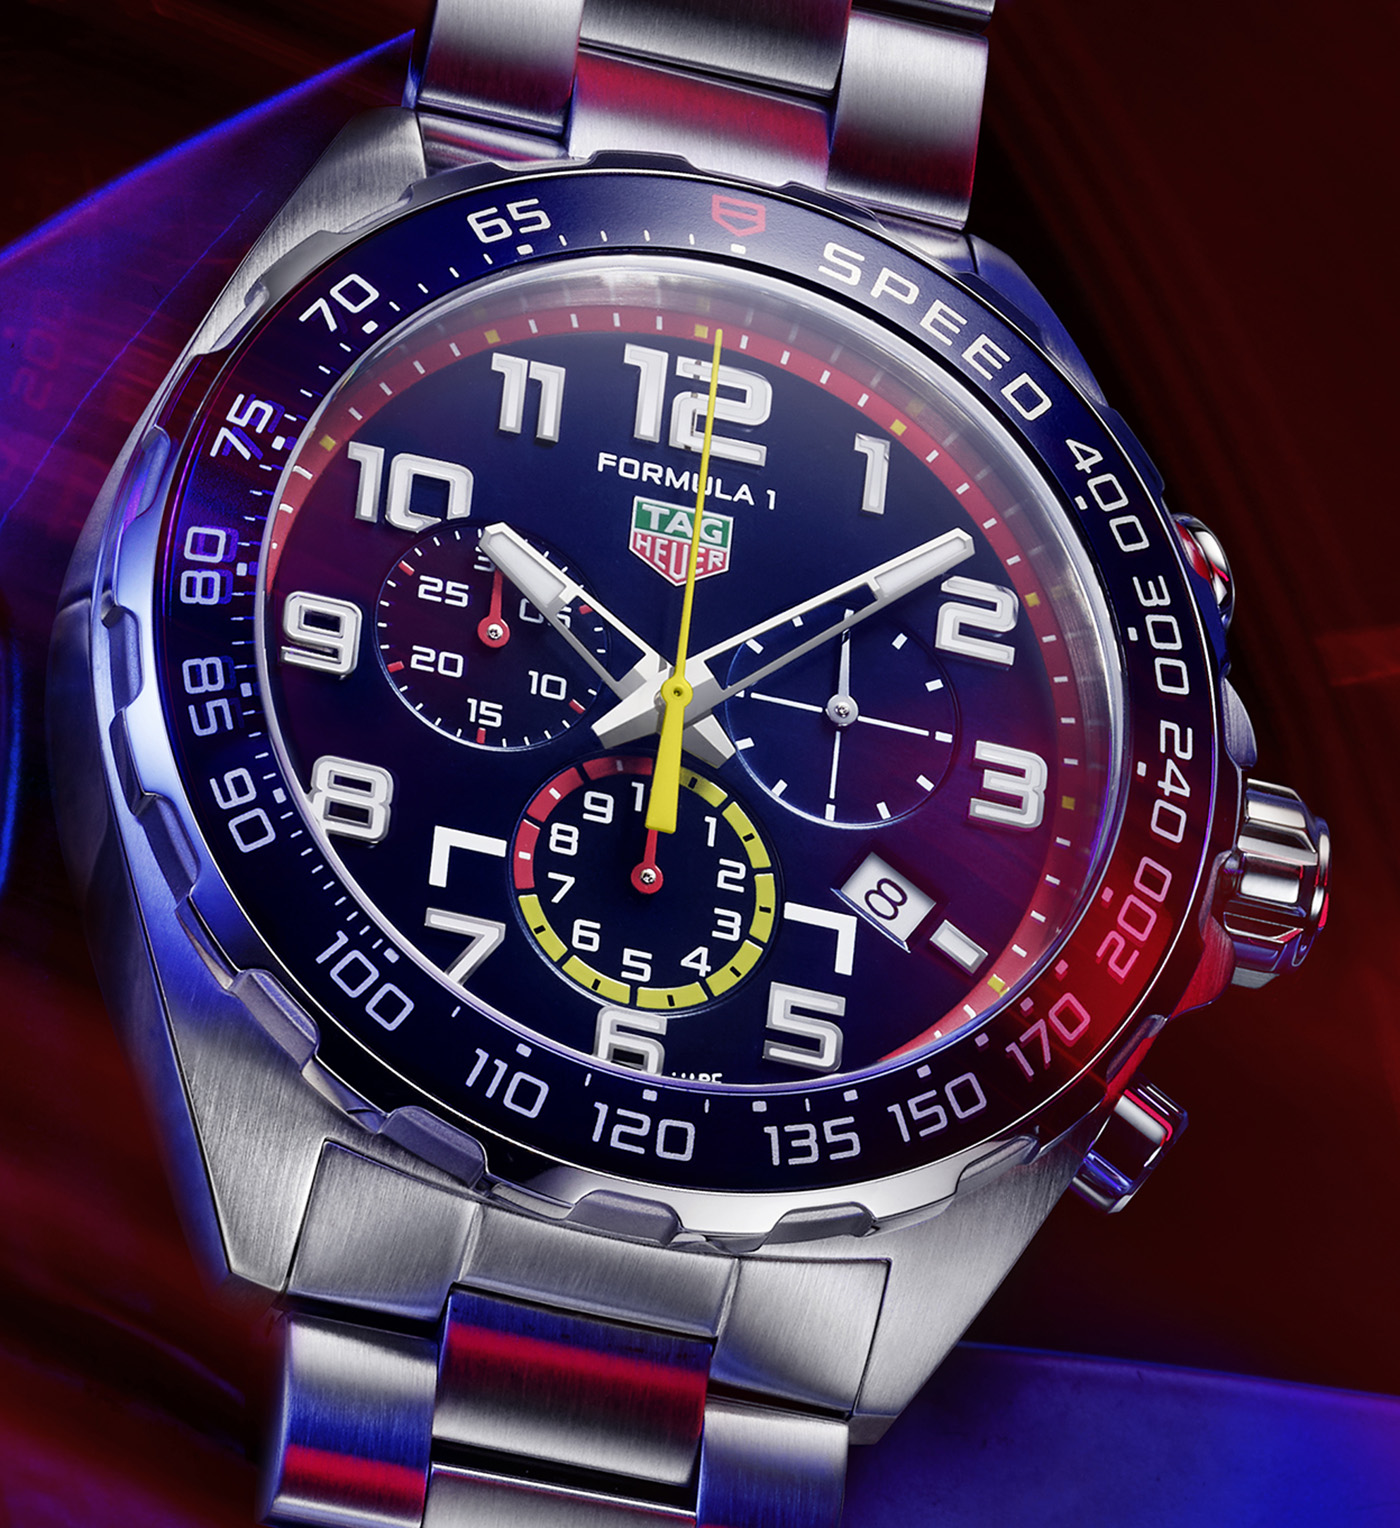 It's Time For TAG Heuer To Bring Back The Original Formula One Watch